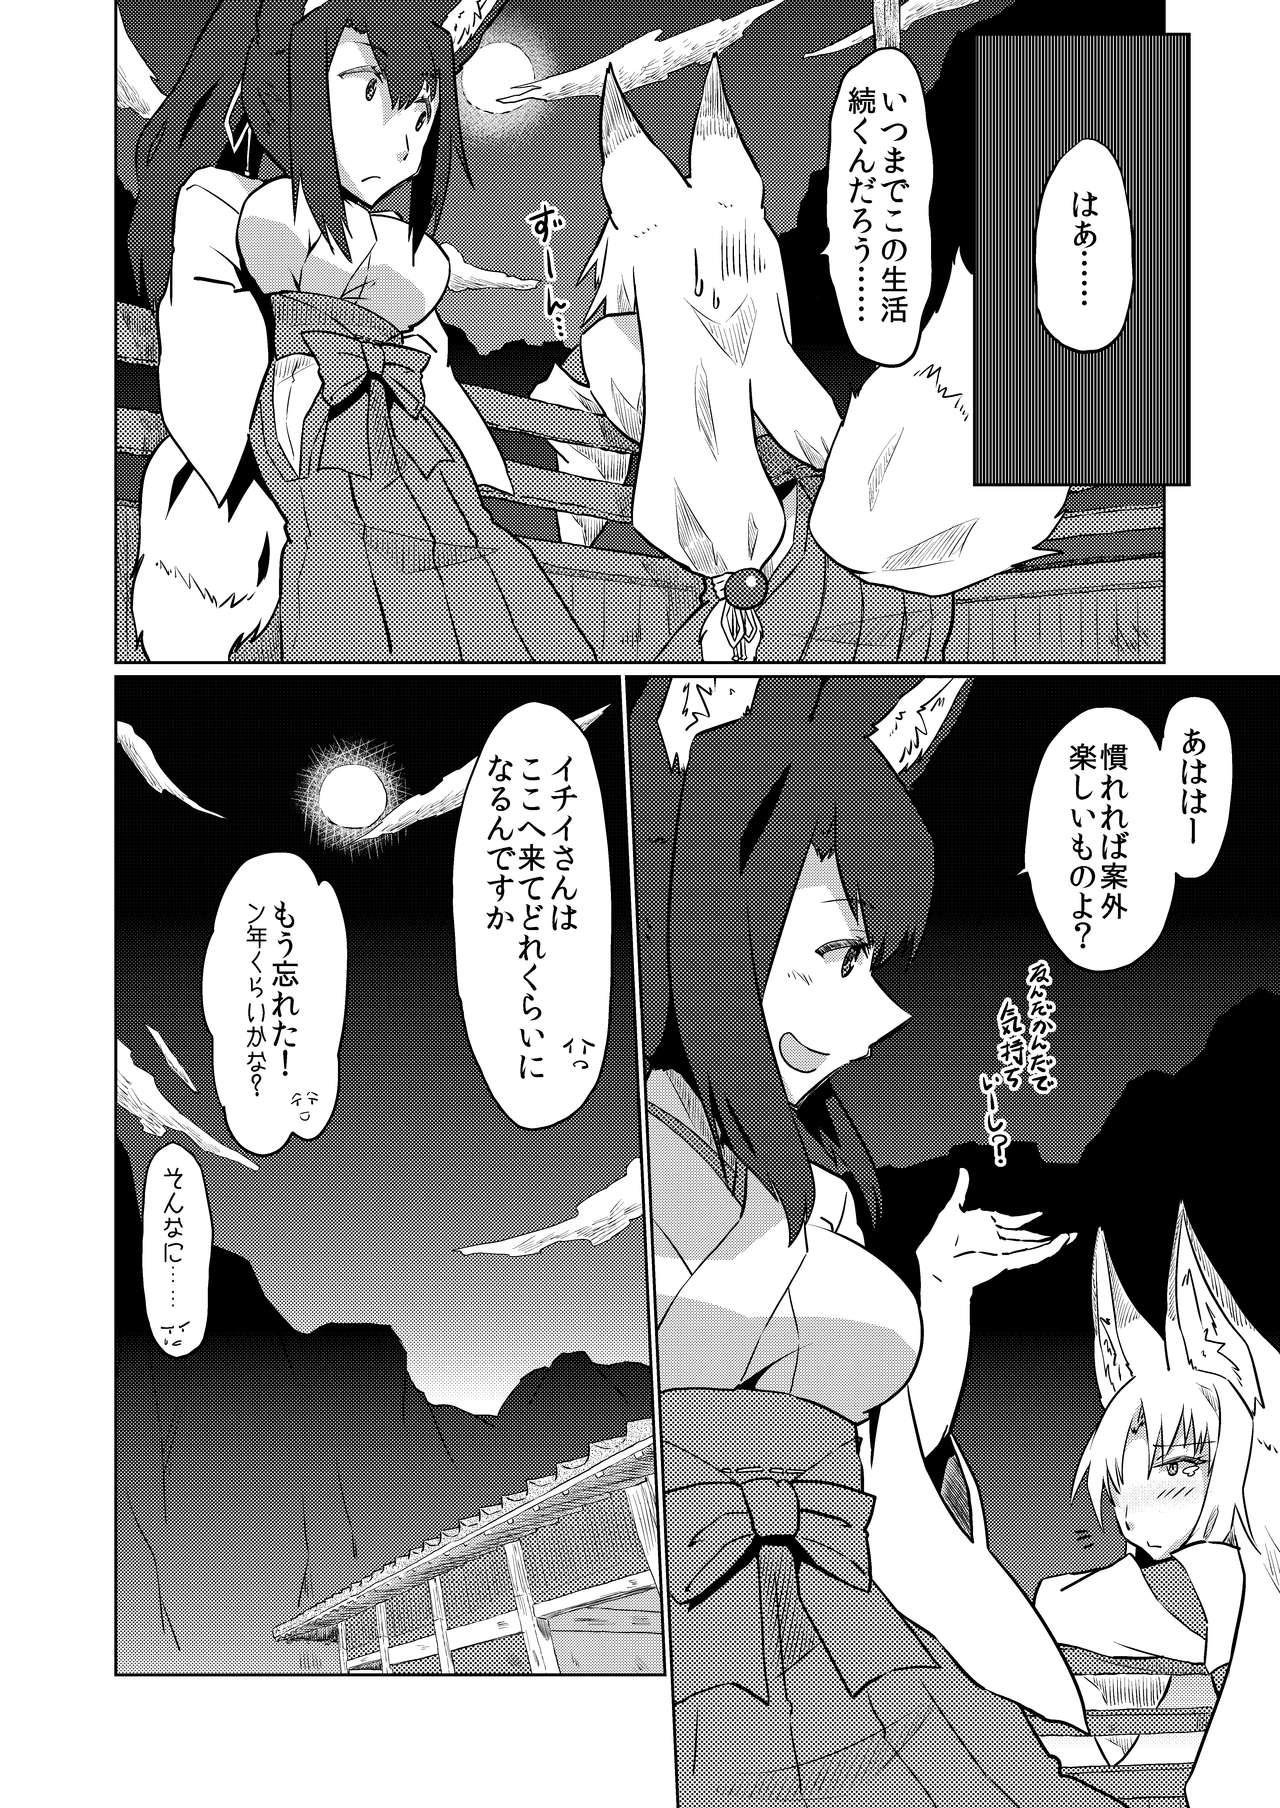 Leaked マクラギツネ第2話 - Original Topless - Page 8